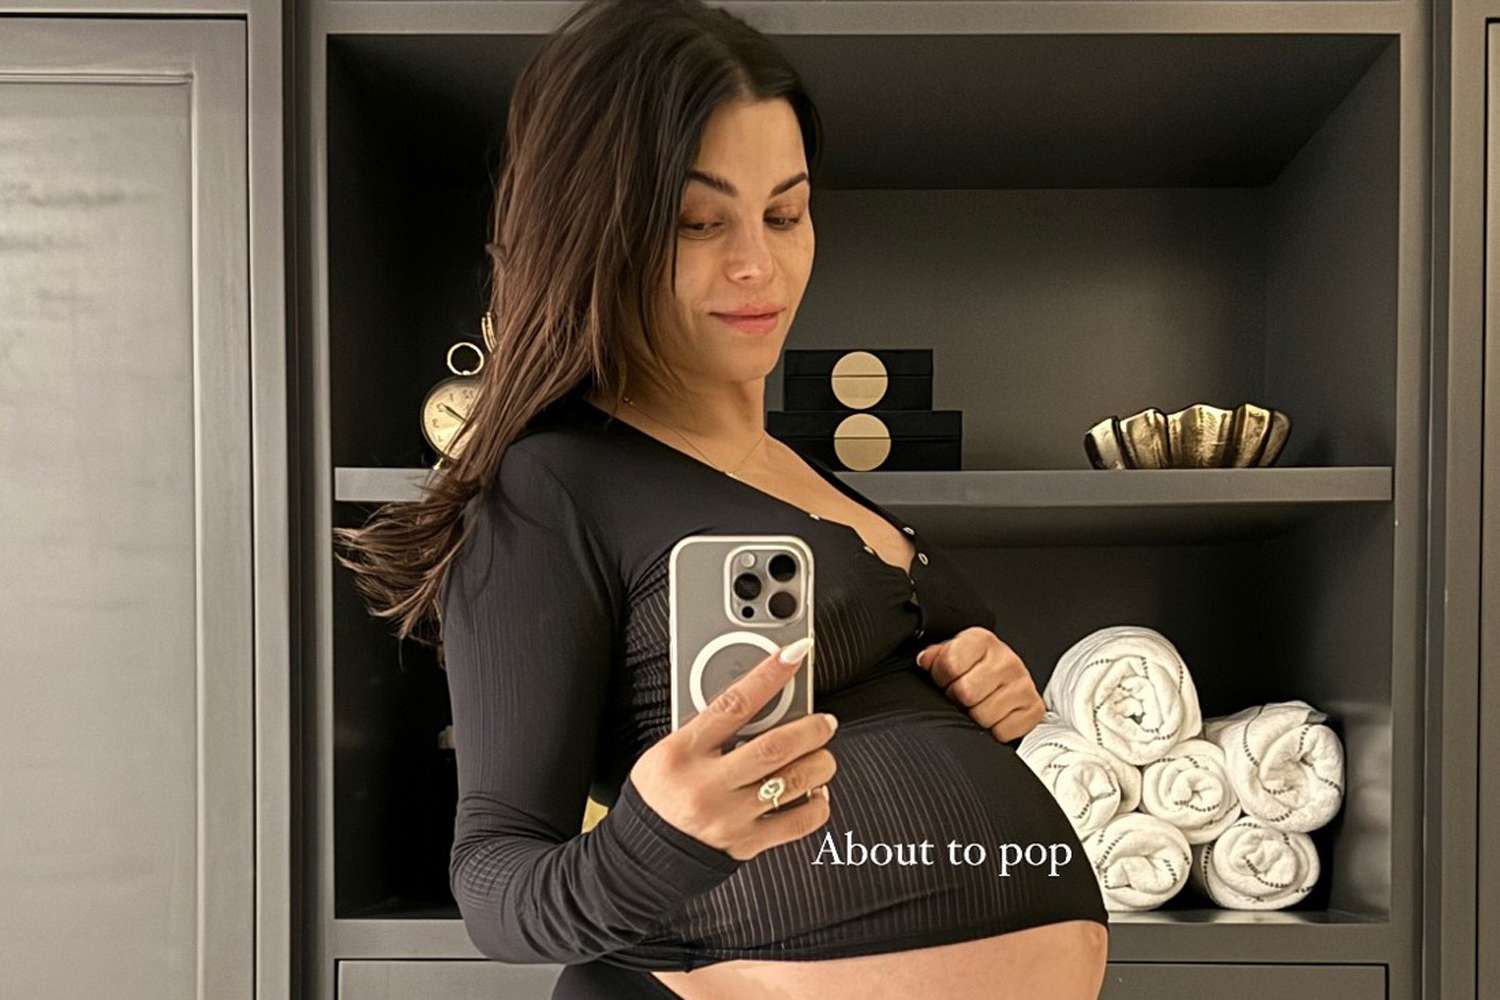 Jenna Dewan Says She’s ‘About to Pop’ and Dealing with Braxton Hicks [Video]